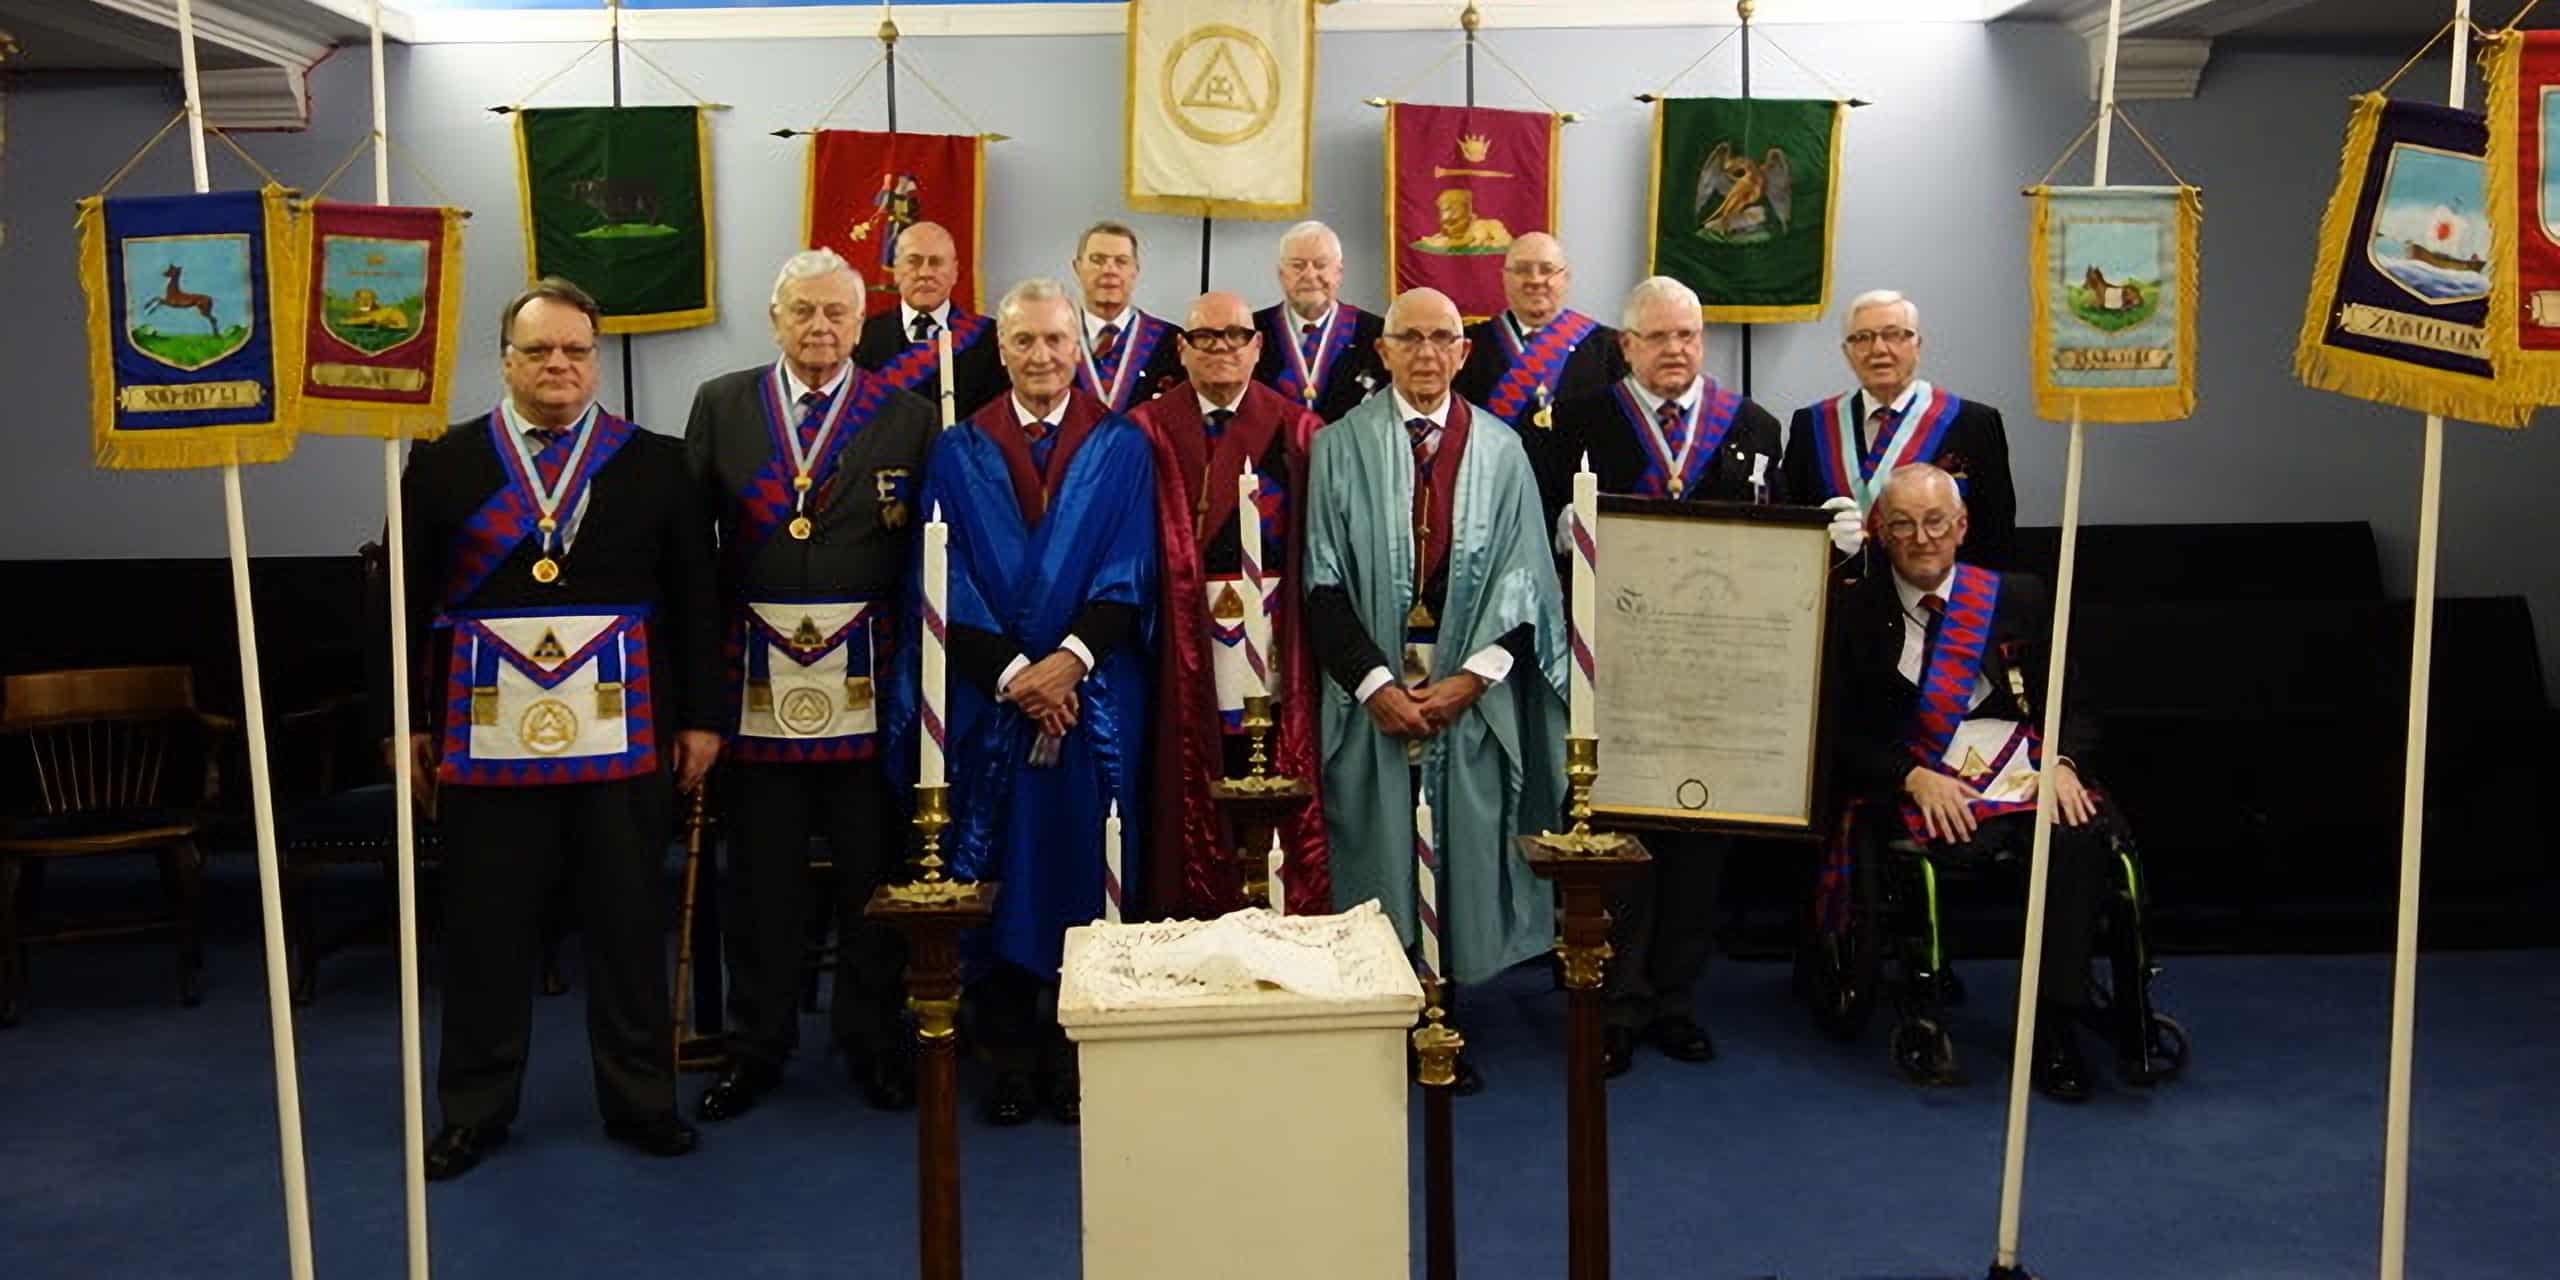 Final Meeting of PAPYREAN Royal Arch Chapter No 5771